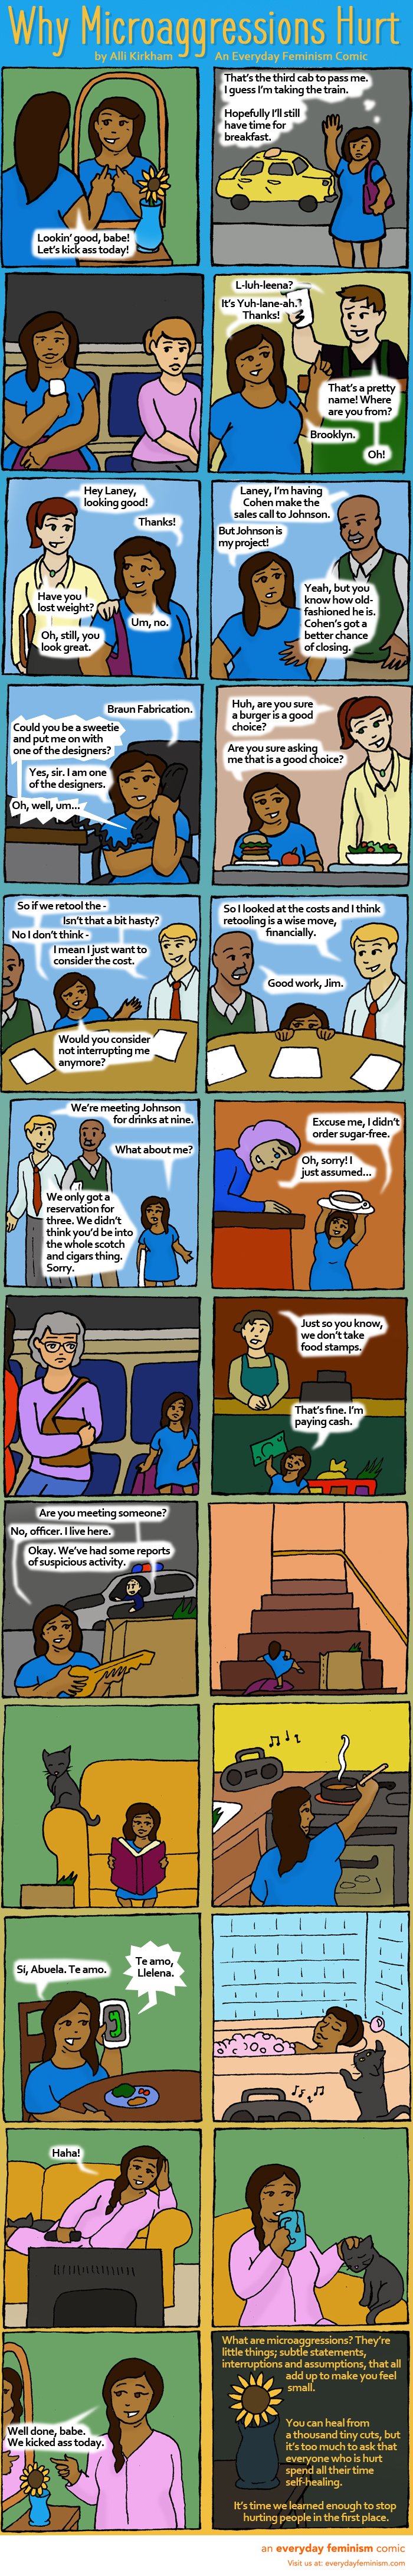 Everyday Feminism comic about microaggressions